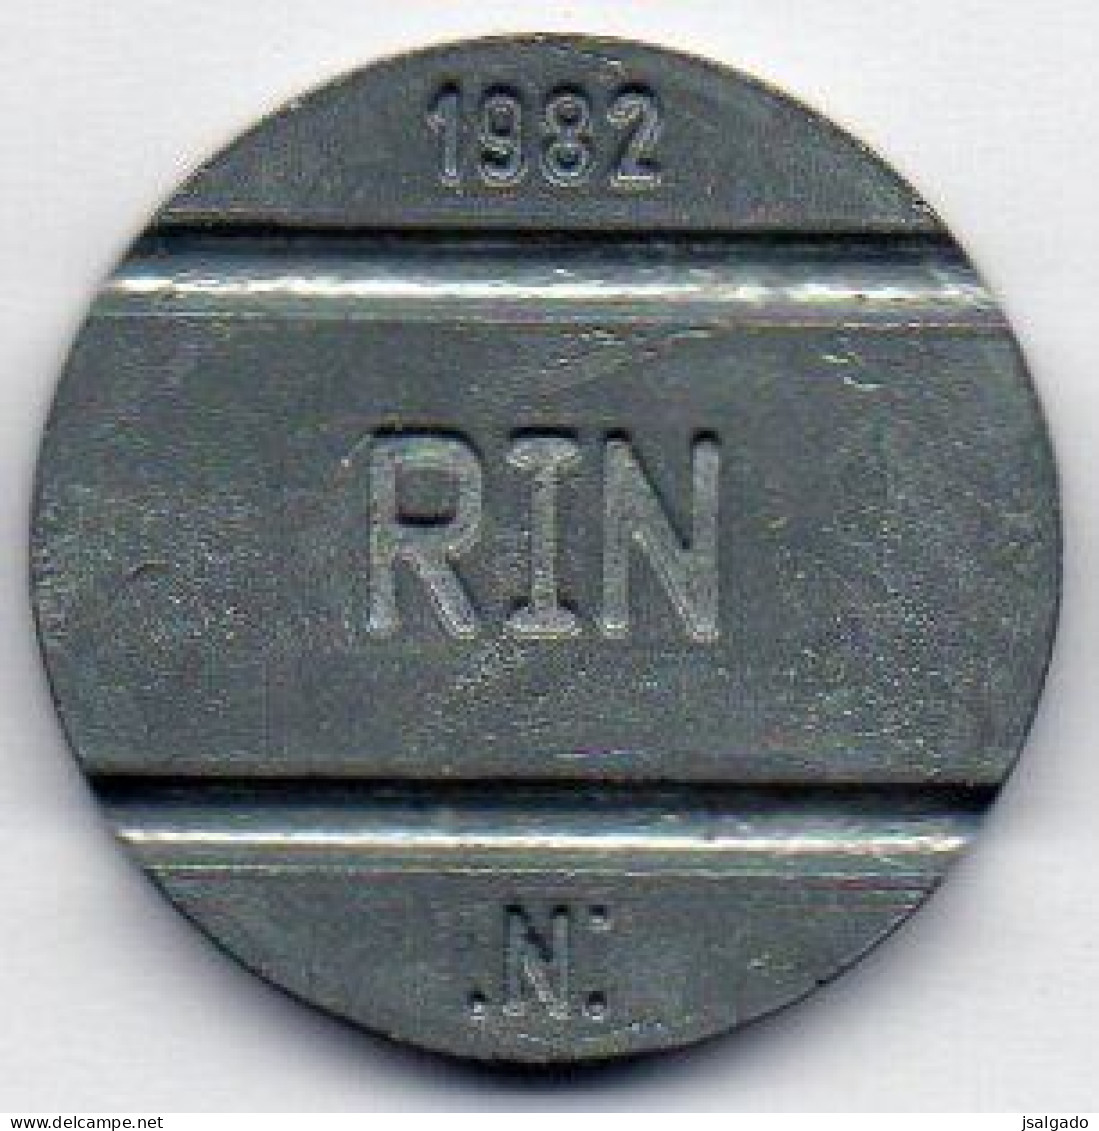 Perú  Telephone Token    1982  (g)  RIN  (g)  .N:   With Three Dots   /  CPTSA  (g)  Telephone In Circle - Monetary /of Necessity